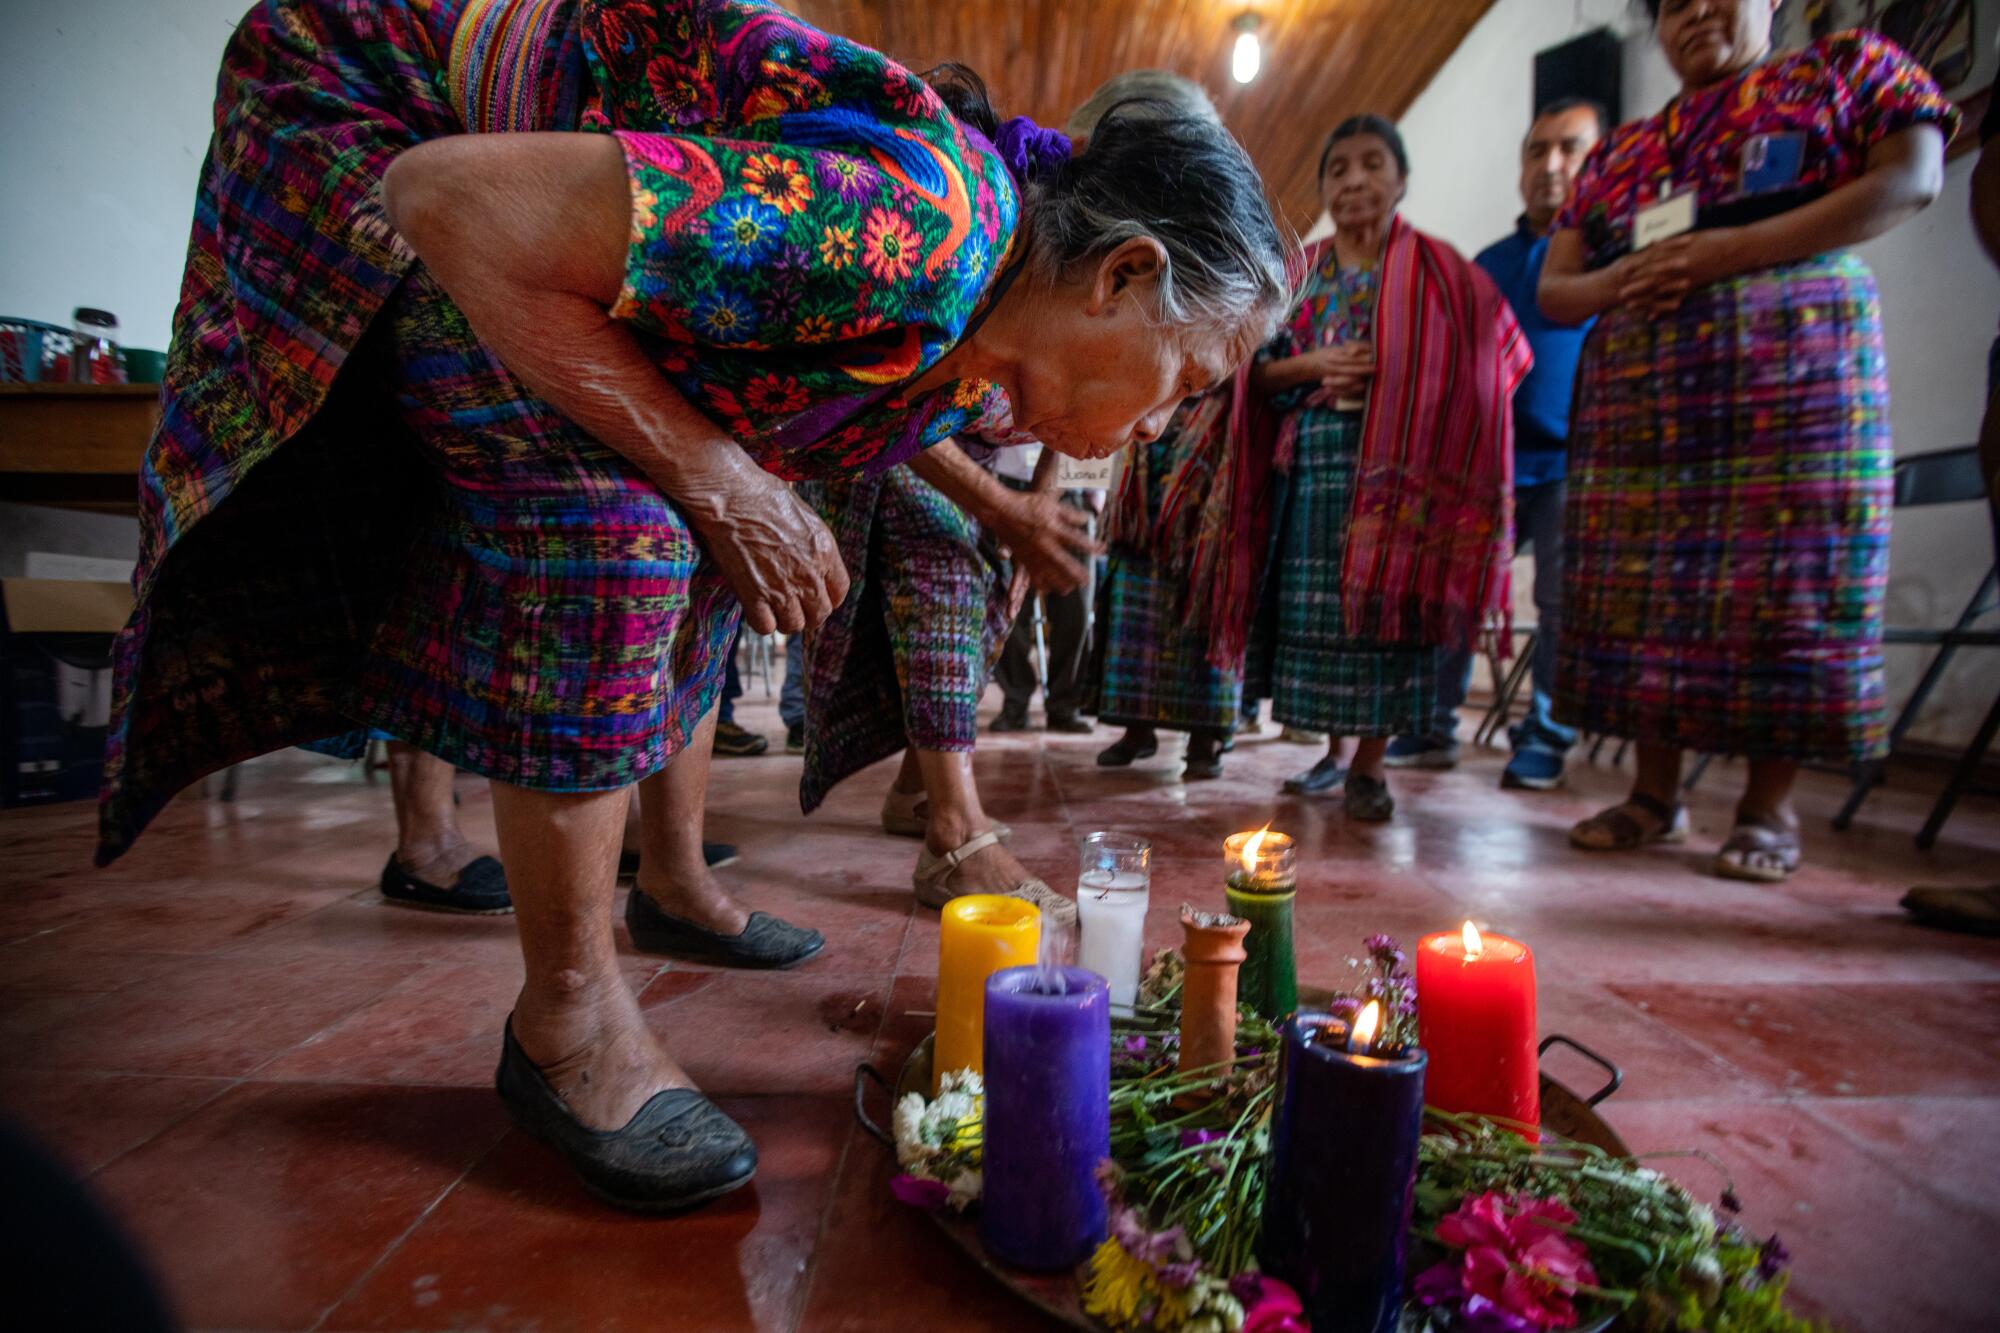 A woman takes a deep breath and blows out the candle at the end of a psychosocial workshop at San Juan Bautista Church.